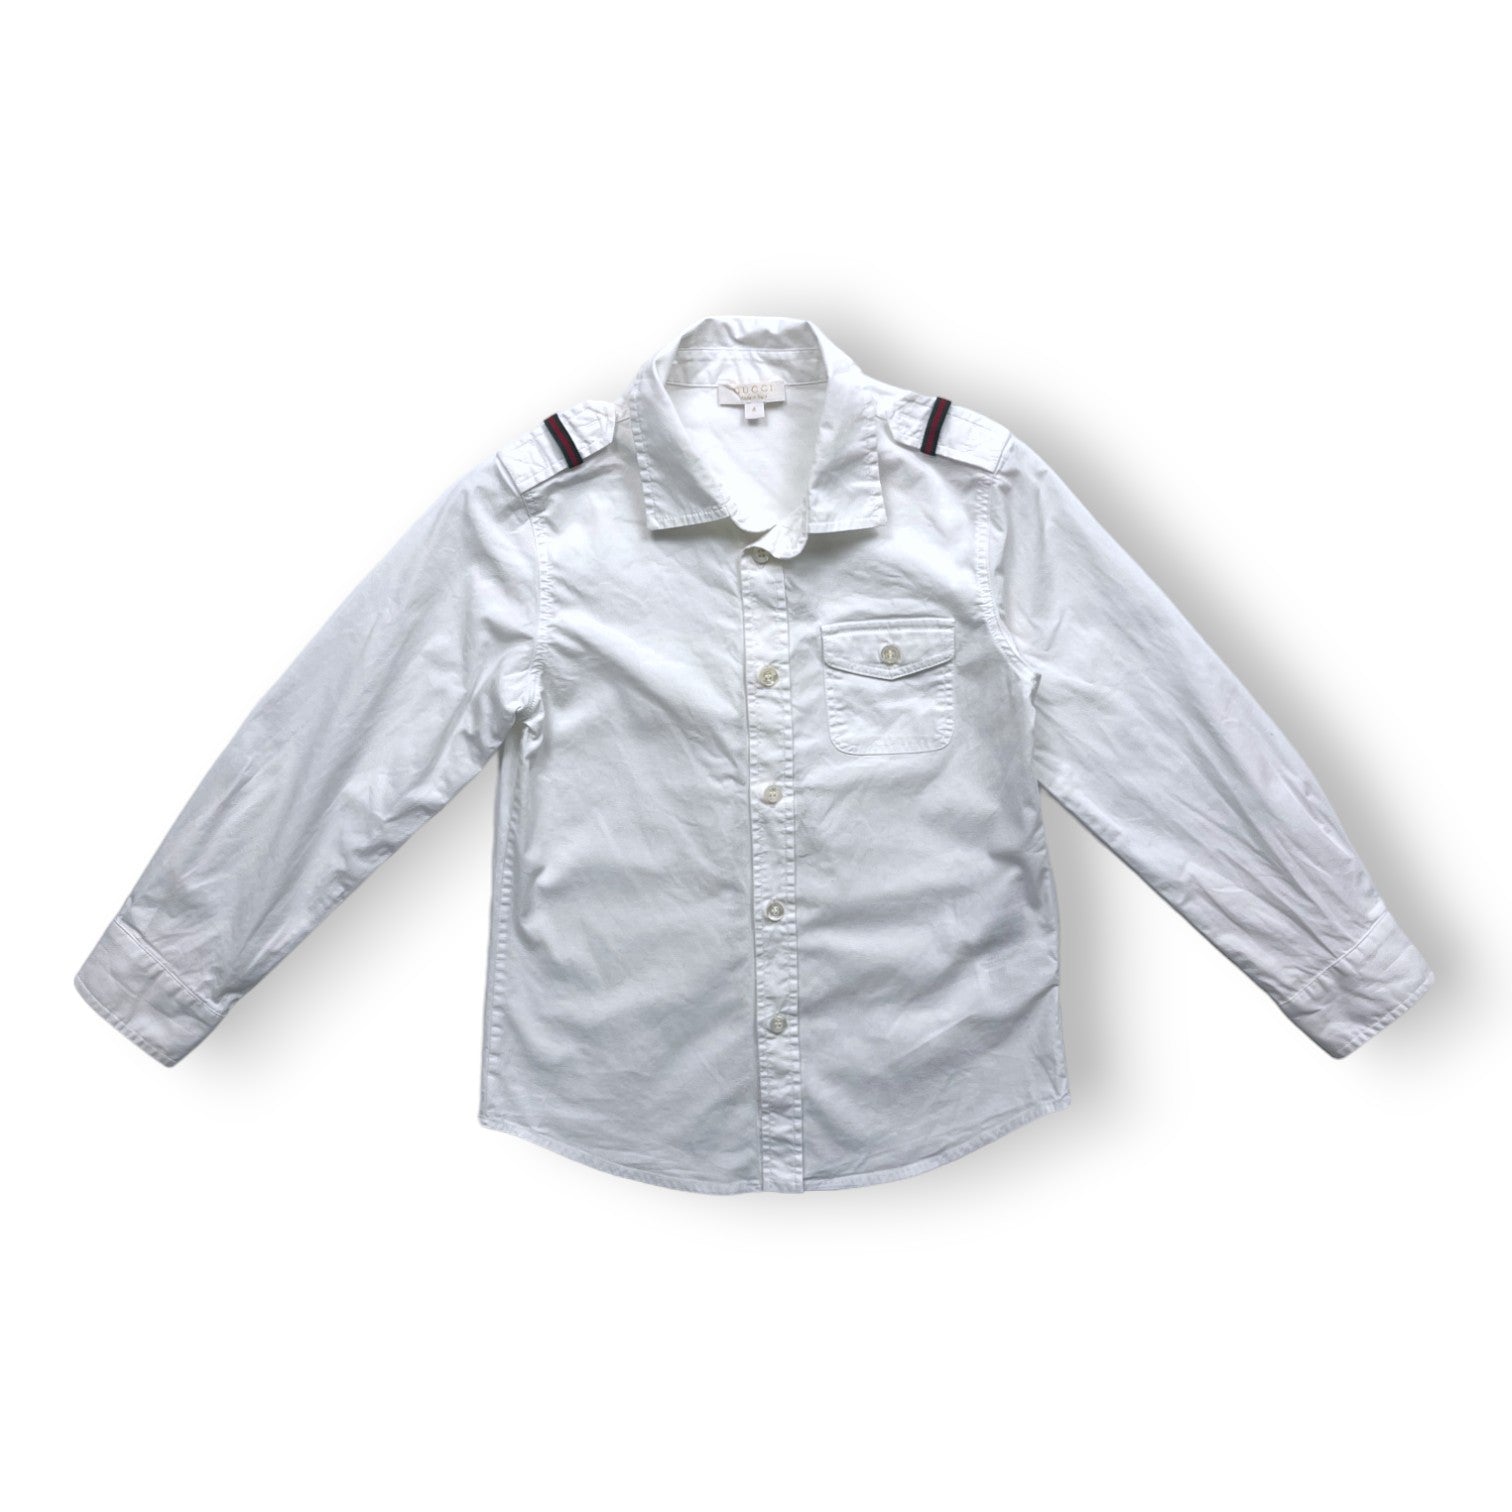 GUCCI - Chemise blanche - 4 ans